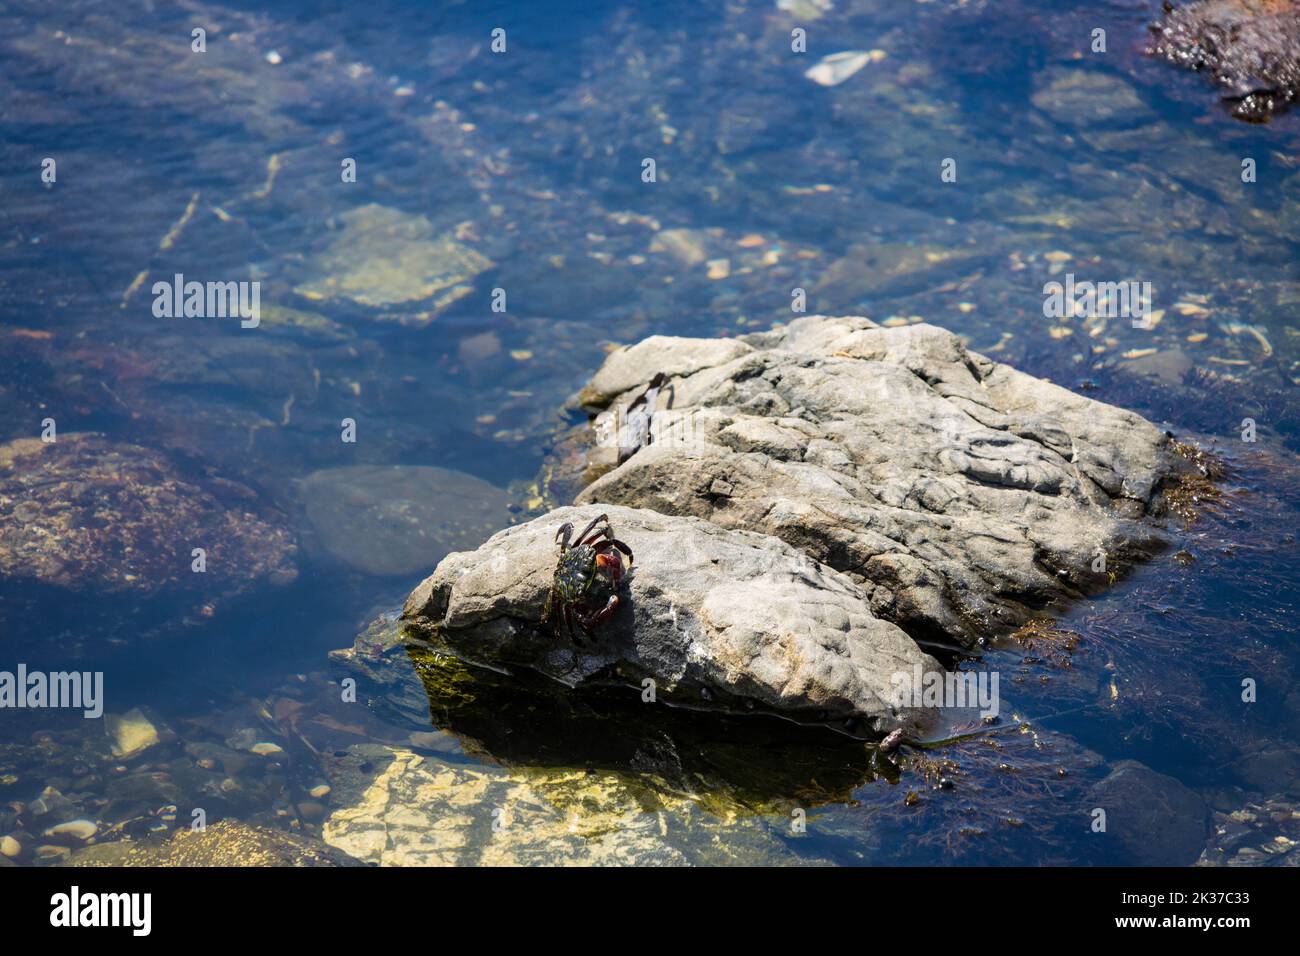 A close-up shot of a green crab on a rock in the water Stock Photo